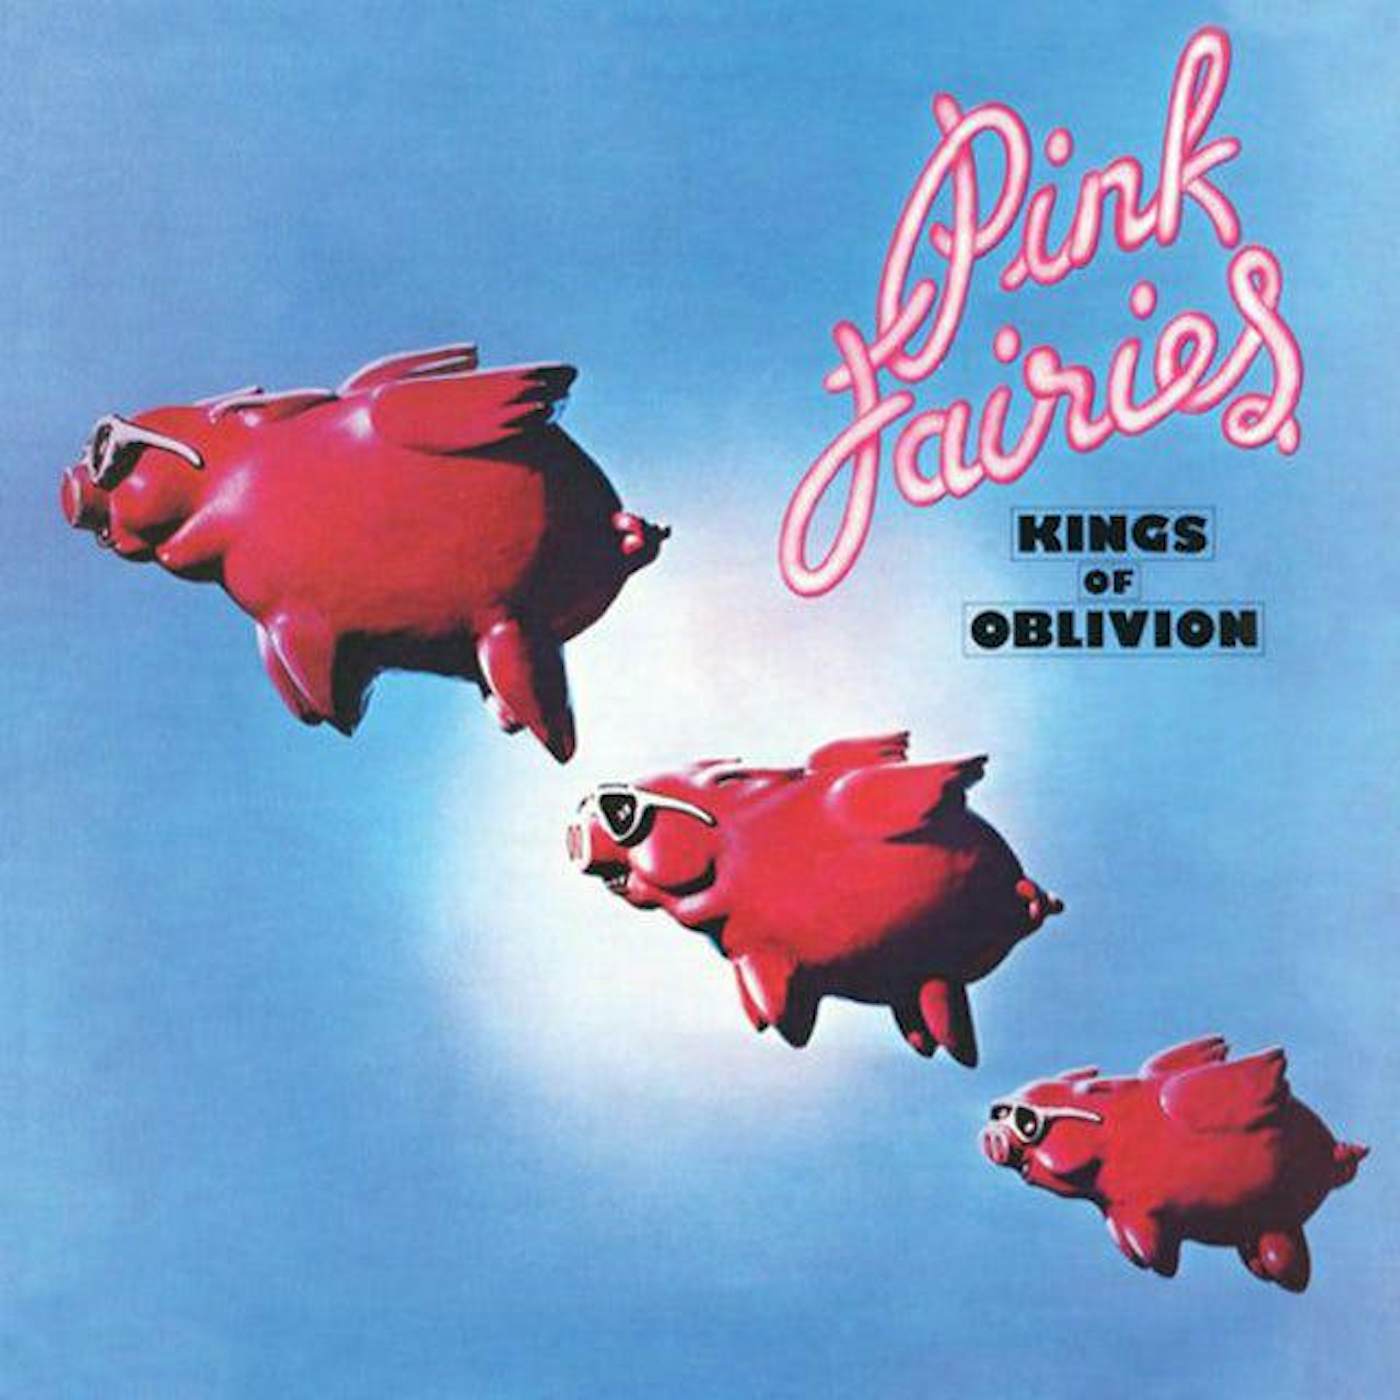 The Pink Fairies Kings Of Oblivion (Clear Pink) Vinyl Record